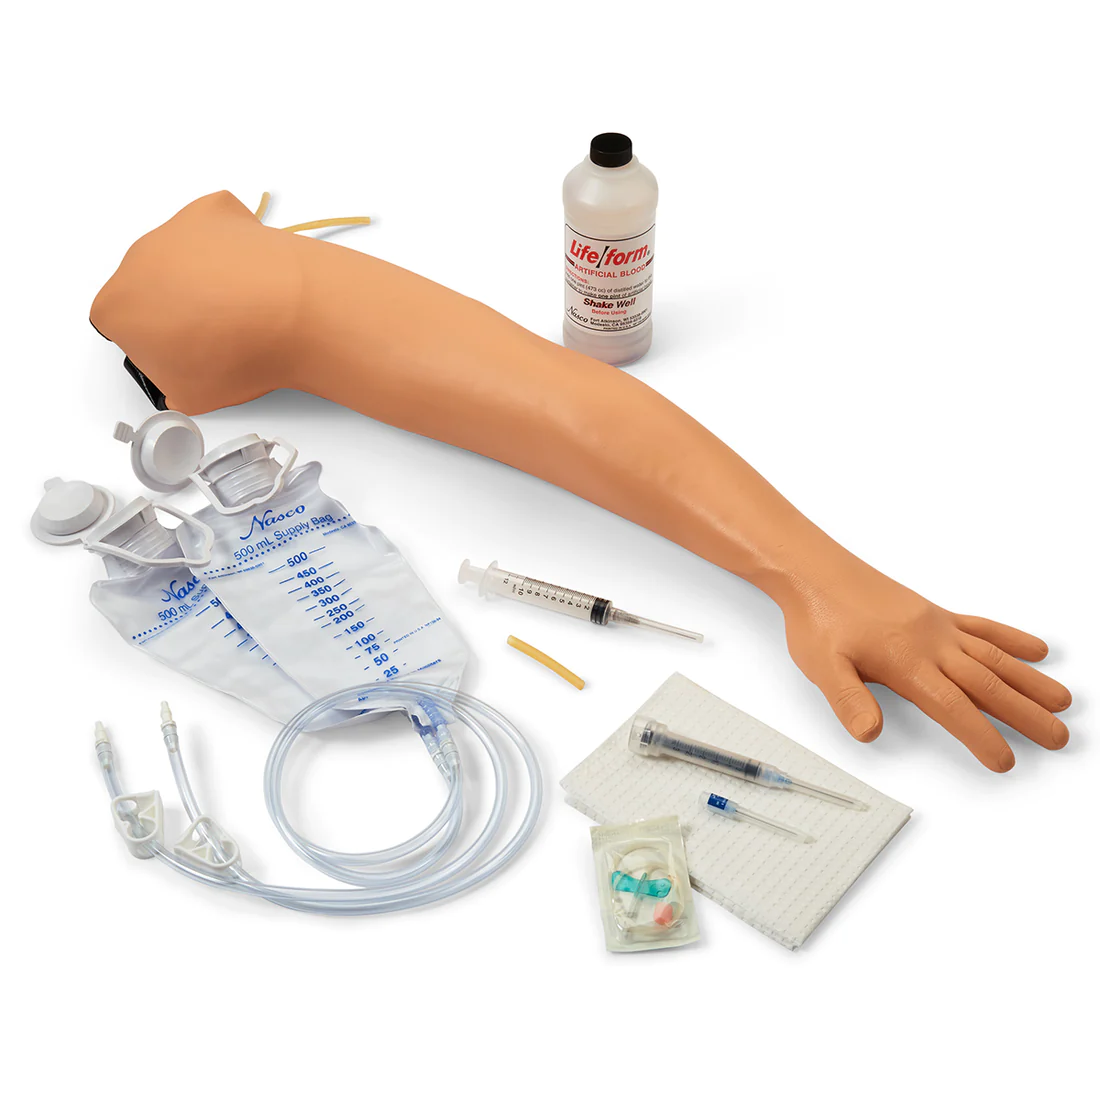 Life/form Adult Venipuncture and Injection Training Arm | Light